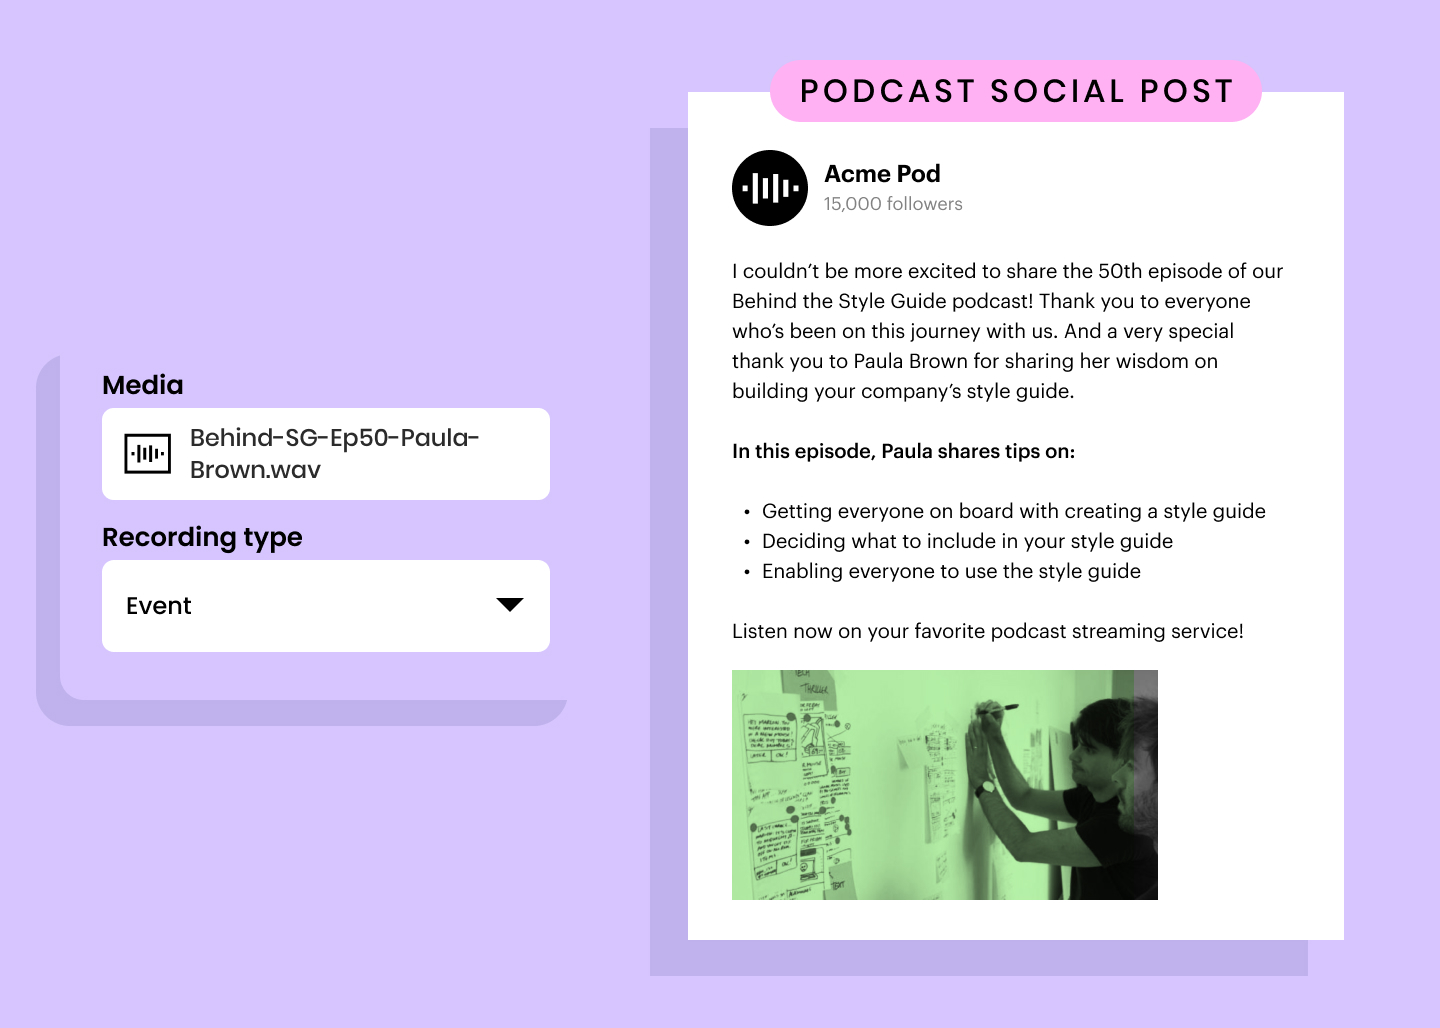 Podcast social post example: I couldn’t be more excited to share the 50th episode of our Behind the Style Guide podcast! Thank you to everyone who’s been on this journey with us. And a very special thank you to Paula Brown for sharing her wisdom on building your company’s style guide. In this episode, Paula shares tips on: Getting everyone on board with creating a style guide / Deciding what to include in your style guide / Enabling everyone to use the style guide. Listen now on your favorite podcast streaming service!